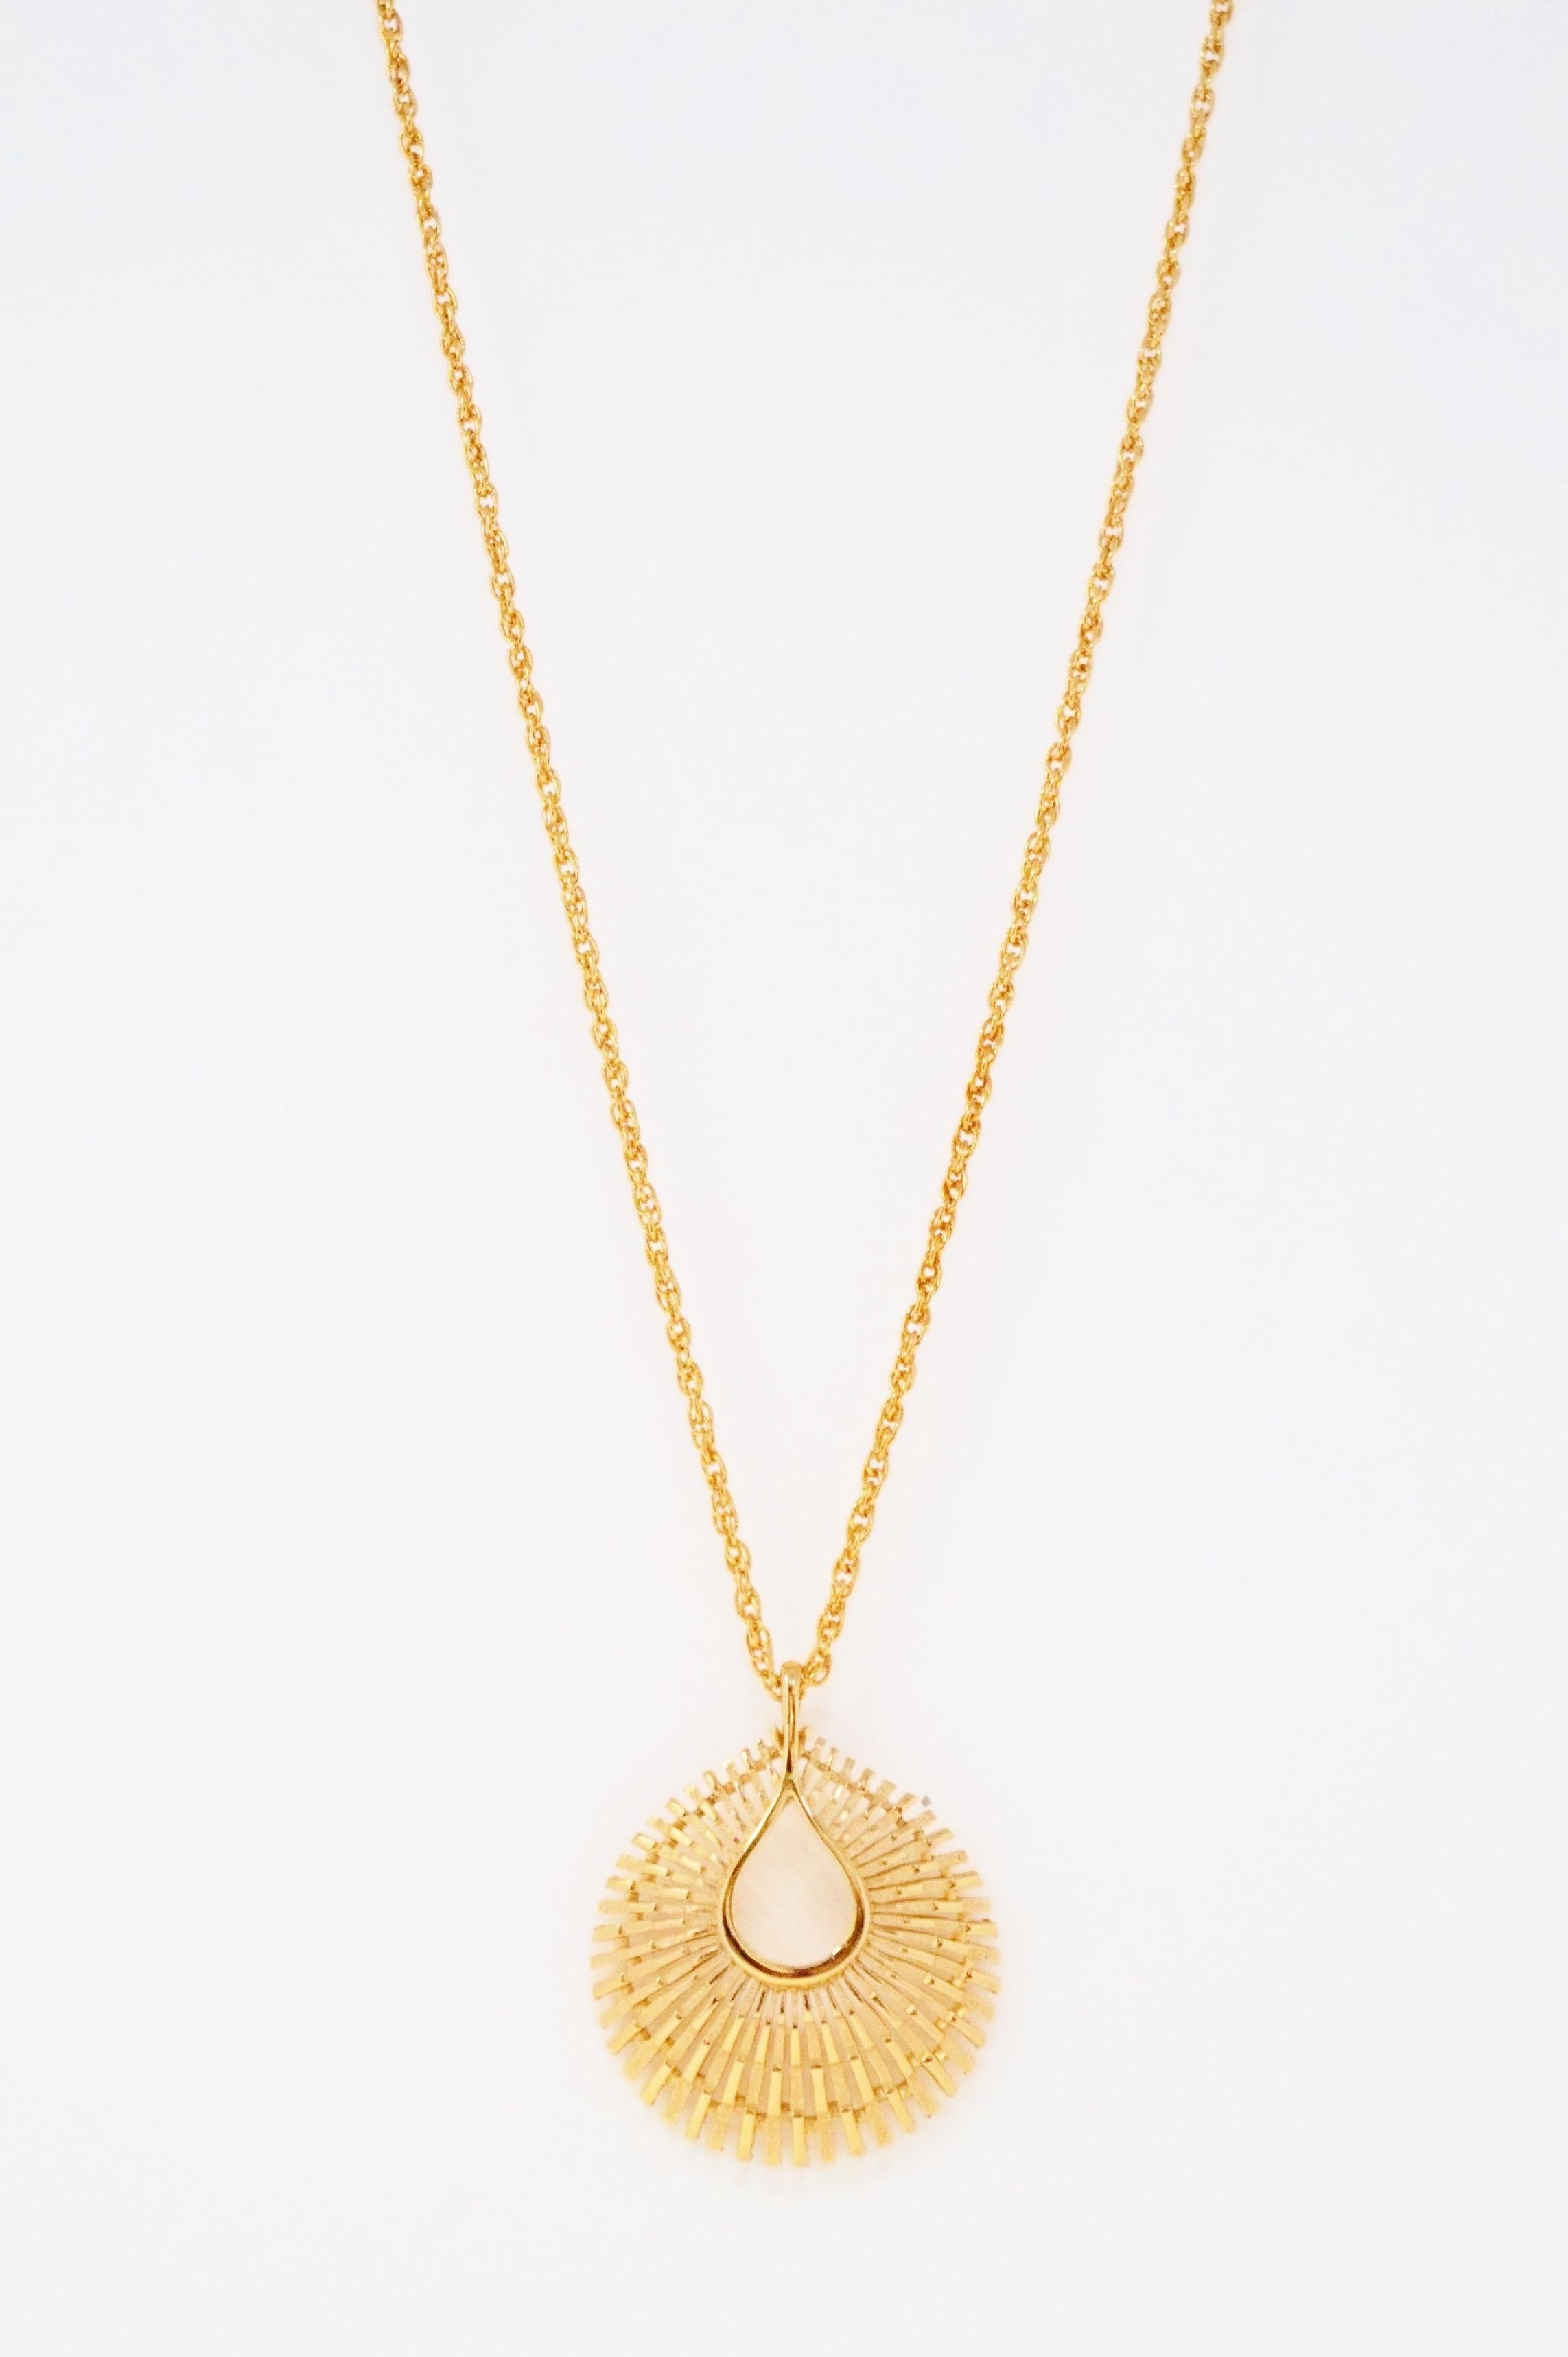 Stunningly beautiful Modernist gold-tone sunburst medallion pendant necklace by Trifari, circa 1955. Trifari is a highly collected costume jewelry brand, noted for it's high quality of construction and intricate details. This piece is signed on